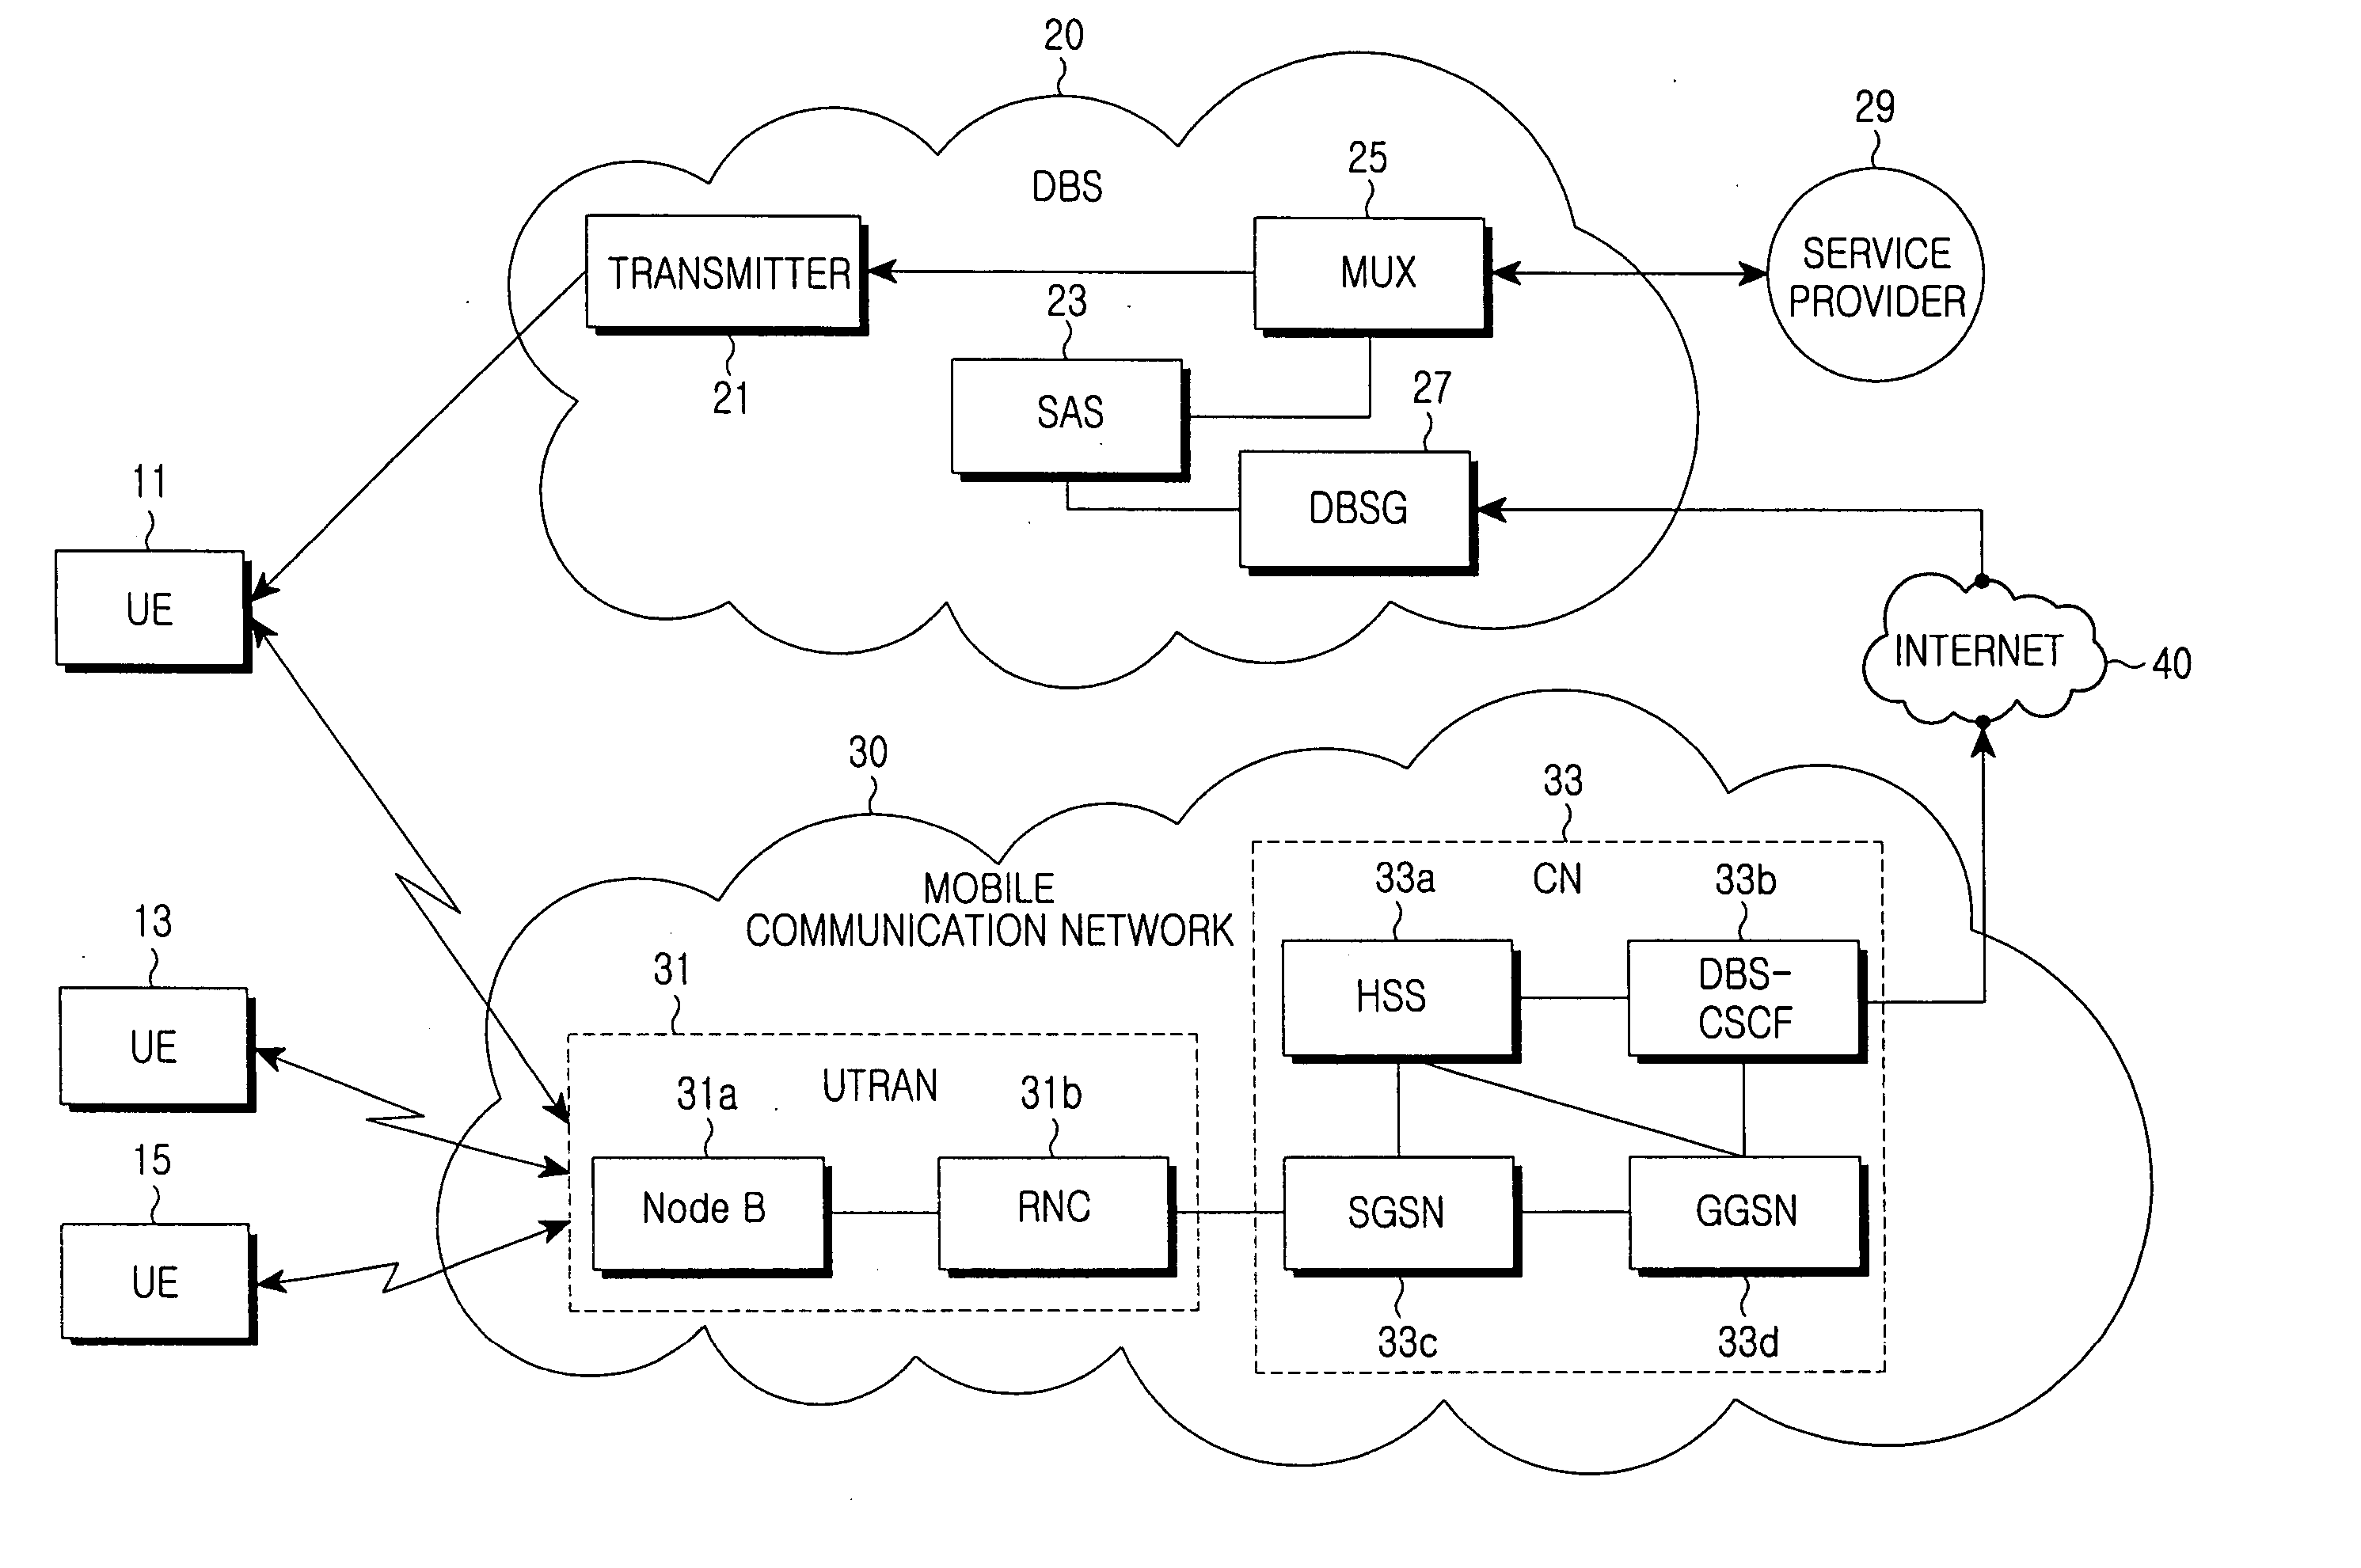 Method and system for subscribing to digital broadcasting service through mobile communication network